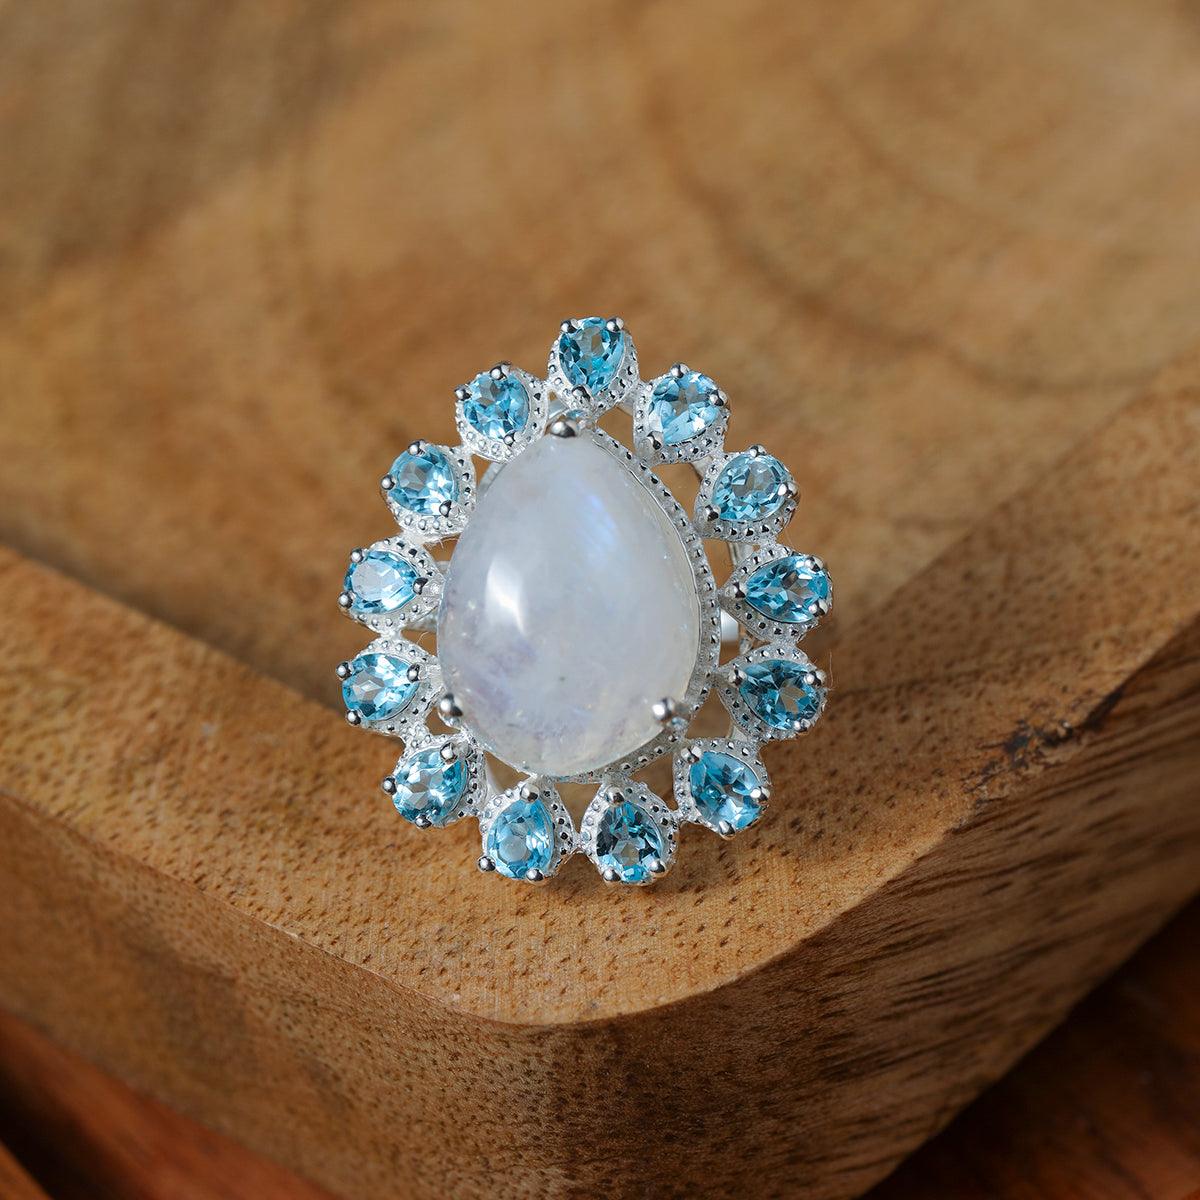 Moonstone & Swiss Blue Topaz Solid 925 Sterling Silver Statement Ring - YoTreasure